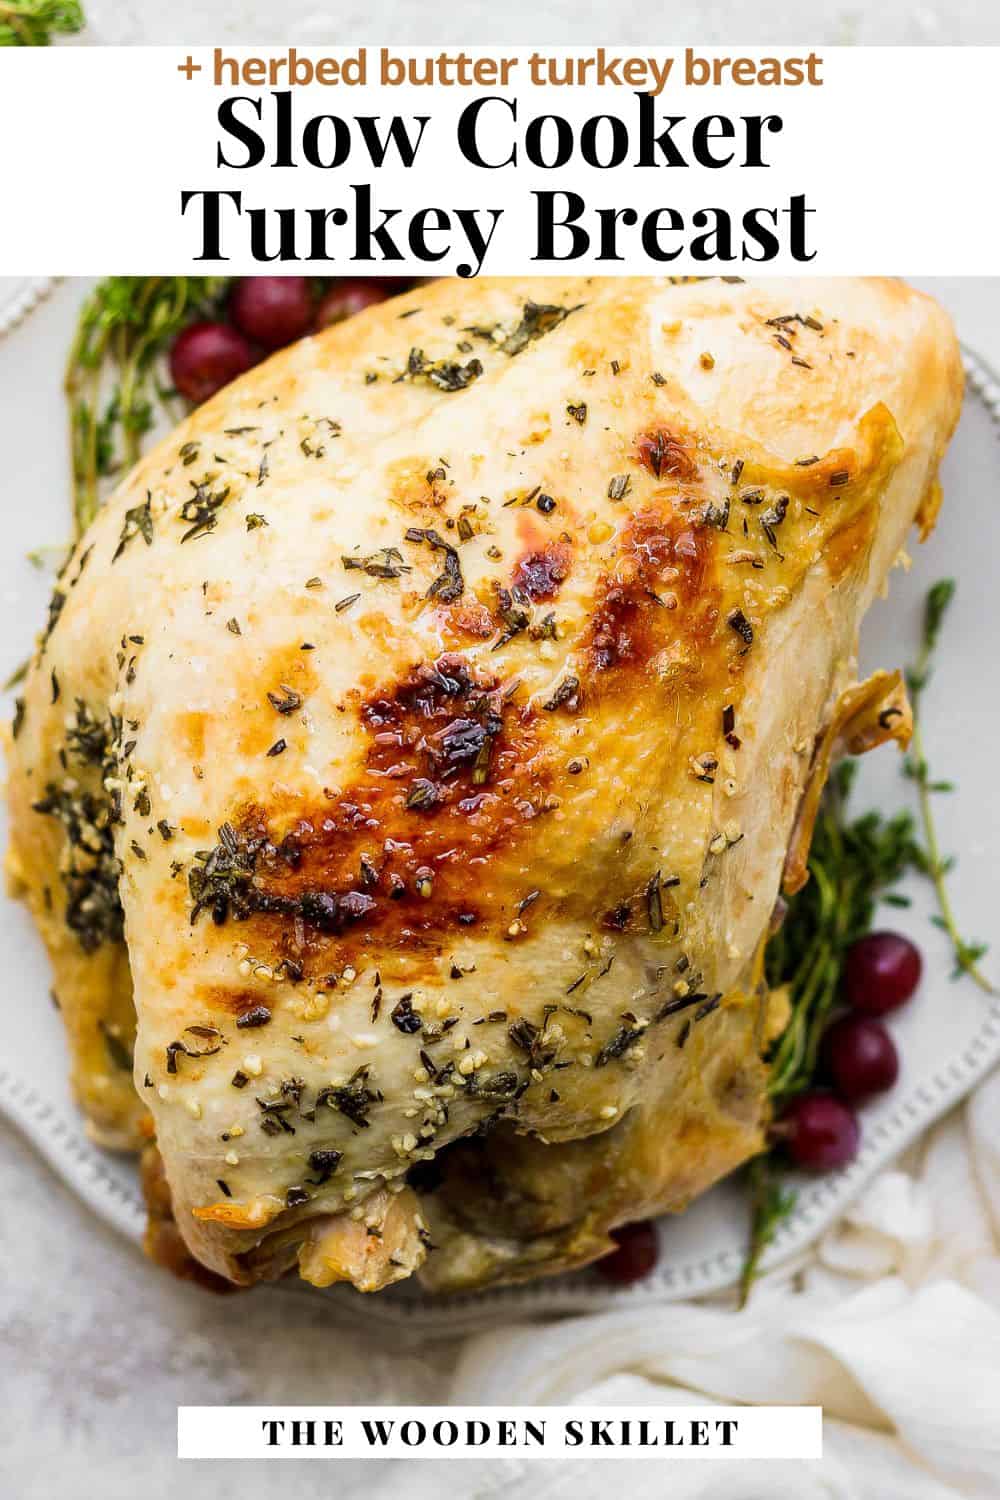 Pinterest image for a slow cooker turkey breast.